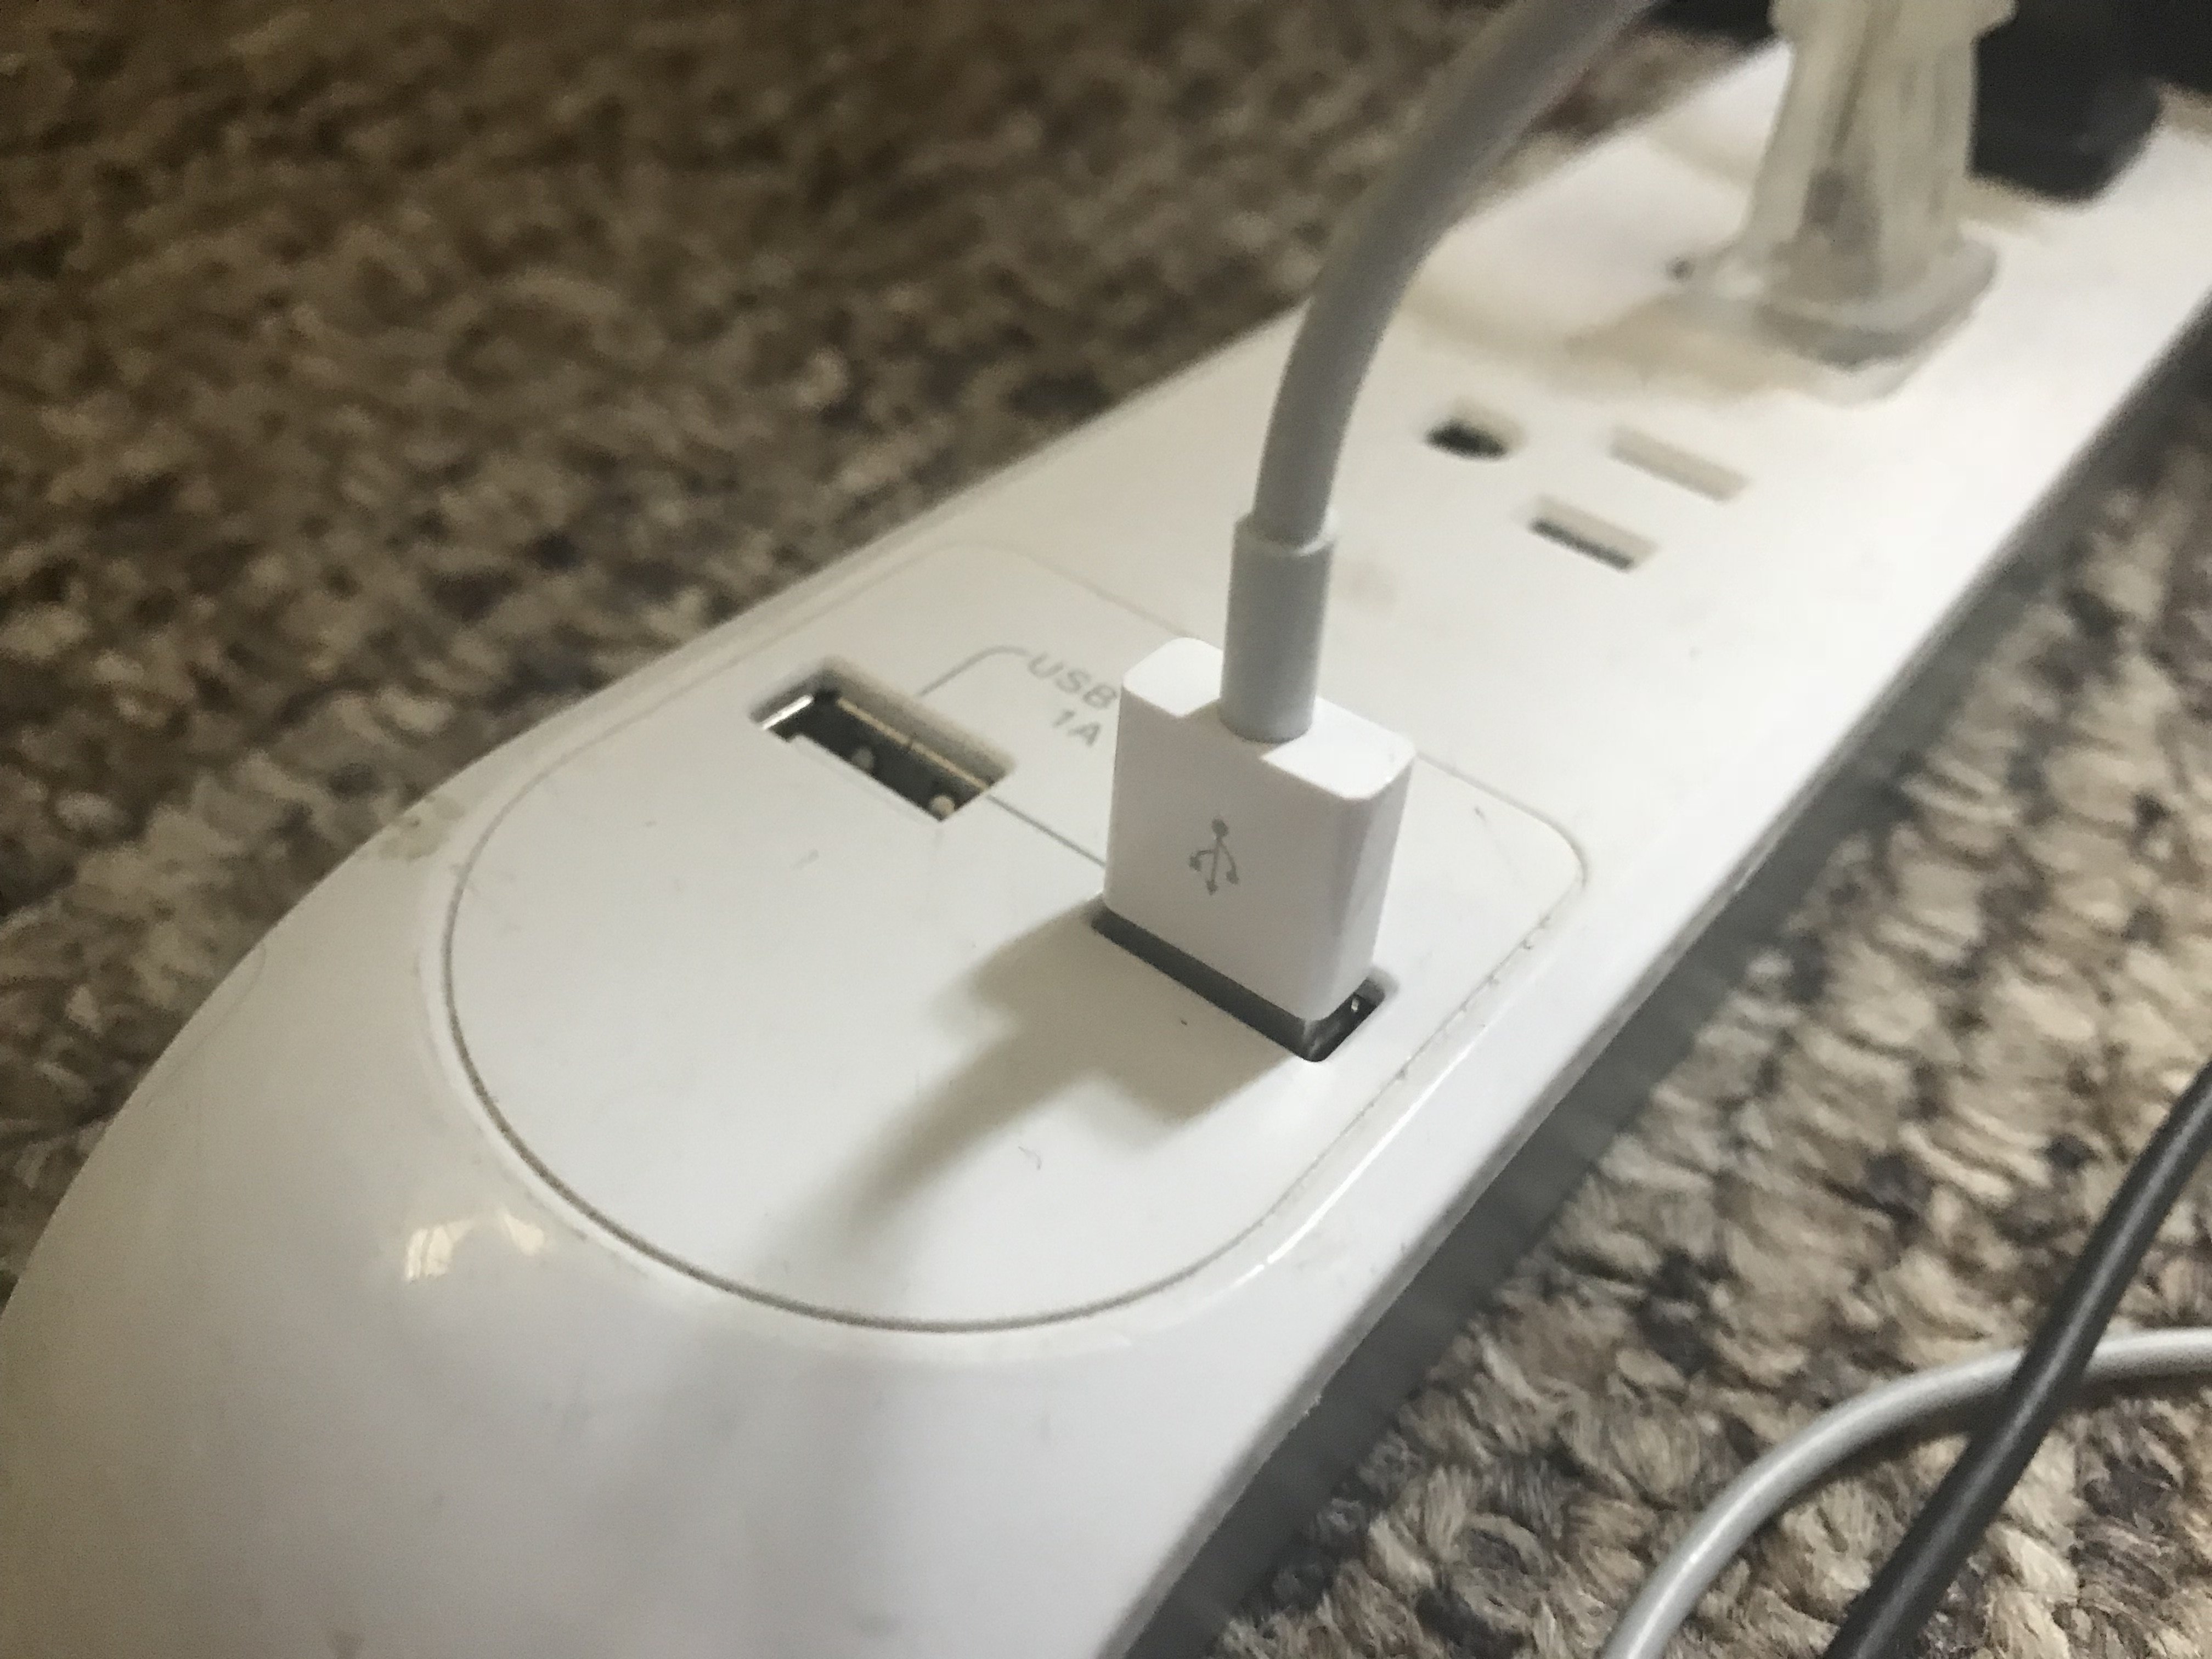 iPhone plugged into usb port